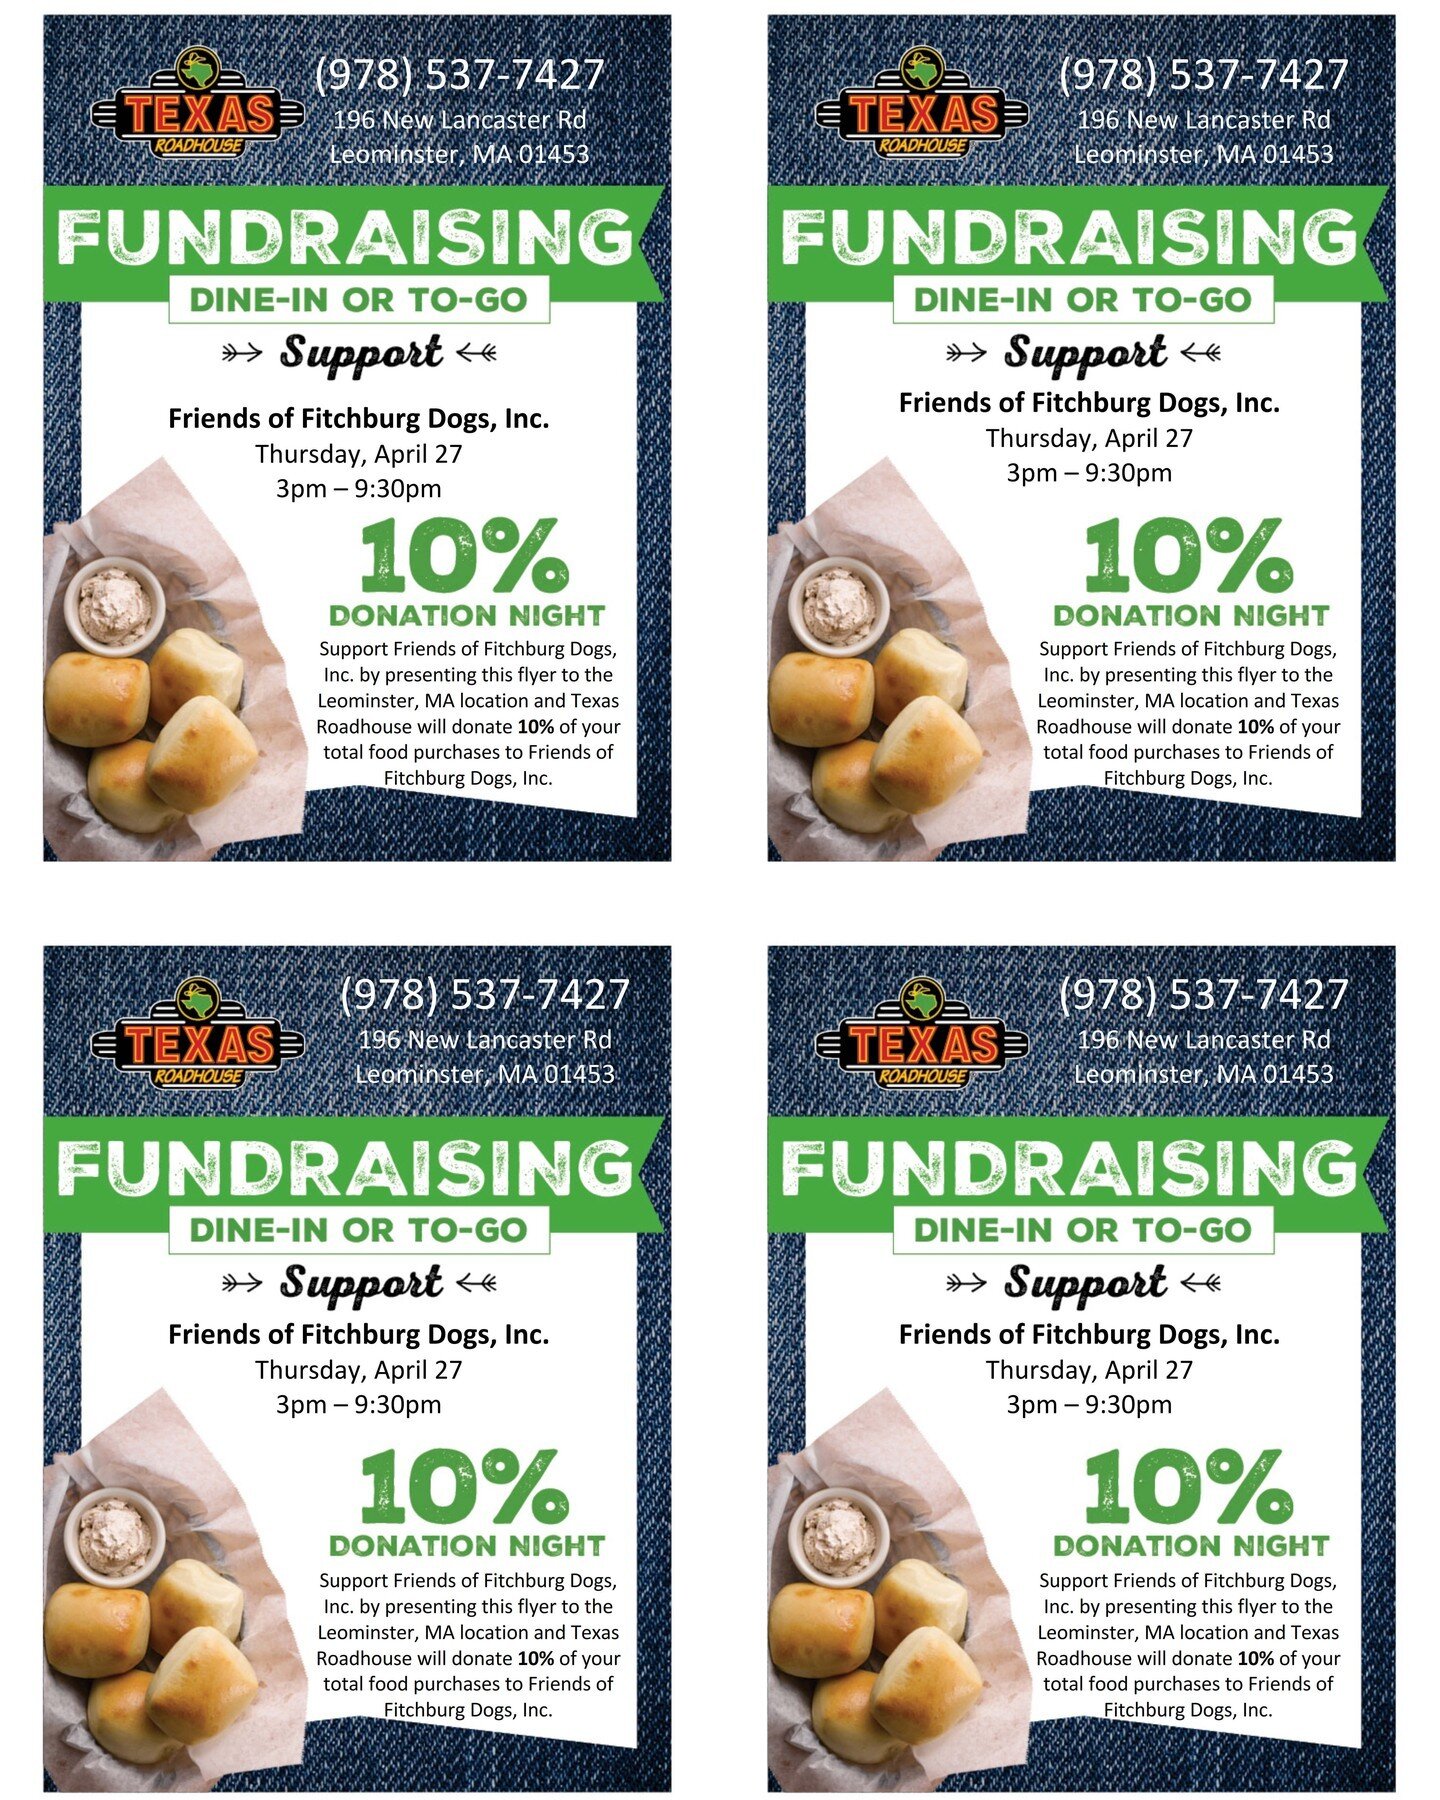 Texas Roadhouse will be donating 10% of food sales for Dinner to the Fitchburg Dog Park from 3:00pm to 9pm on Thursday April 27th, 2023
Please print the coupon attached &amp; give to server to ensure the Dog Park gets the donation!Dining to donate in